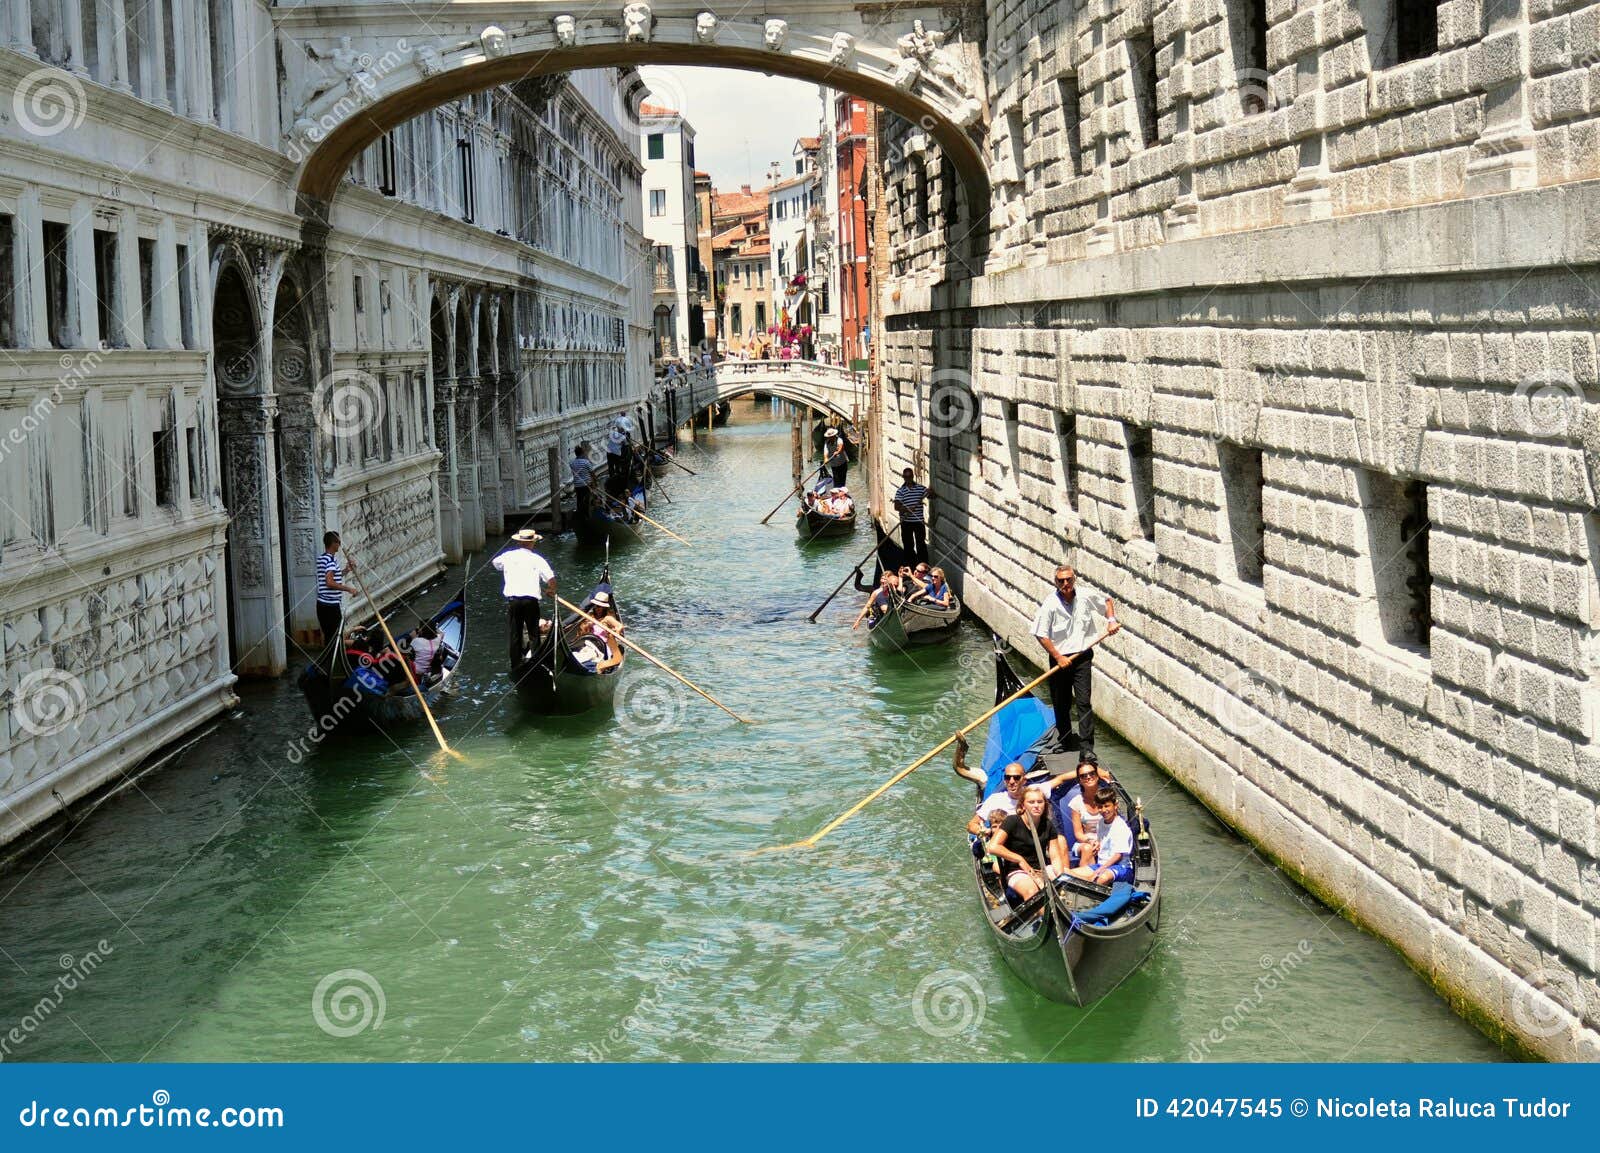 Venice City With The Bridge Of Sighs And Gondola , Italy ...